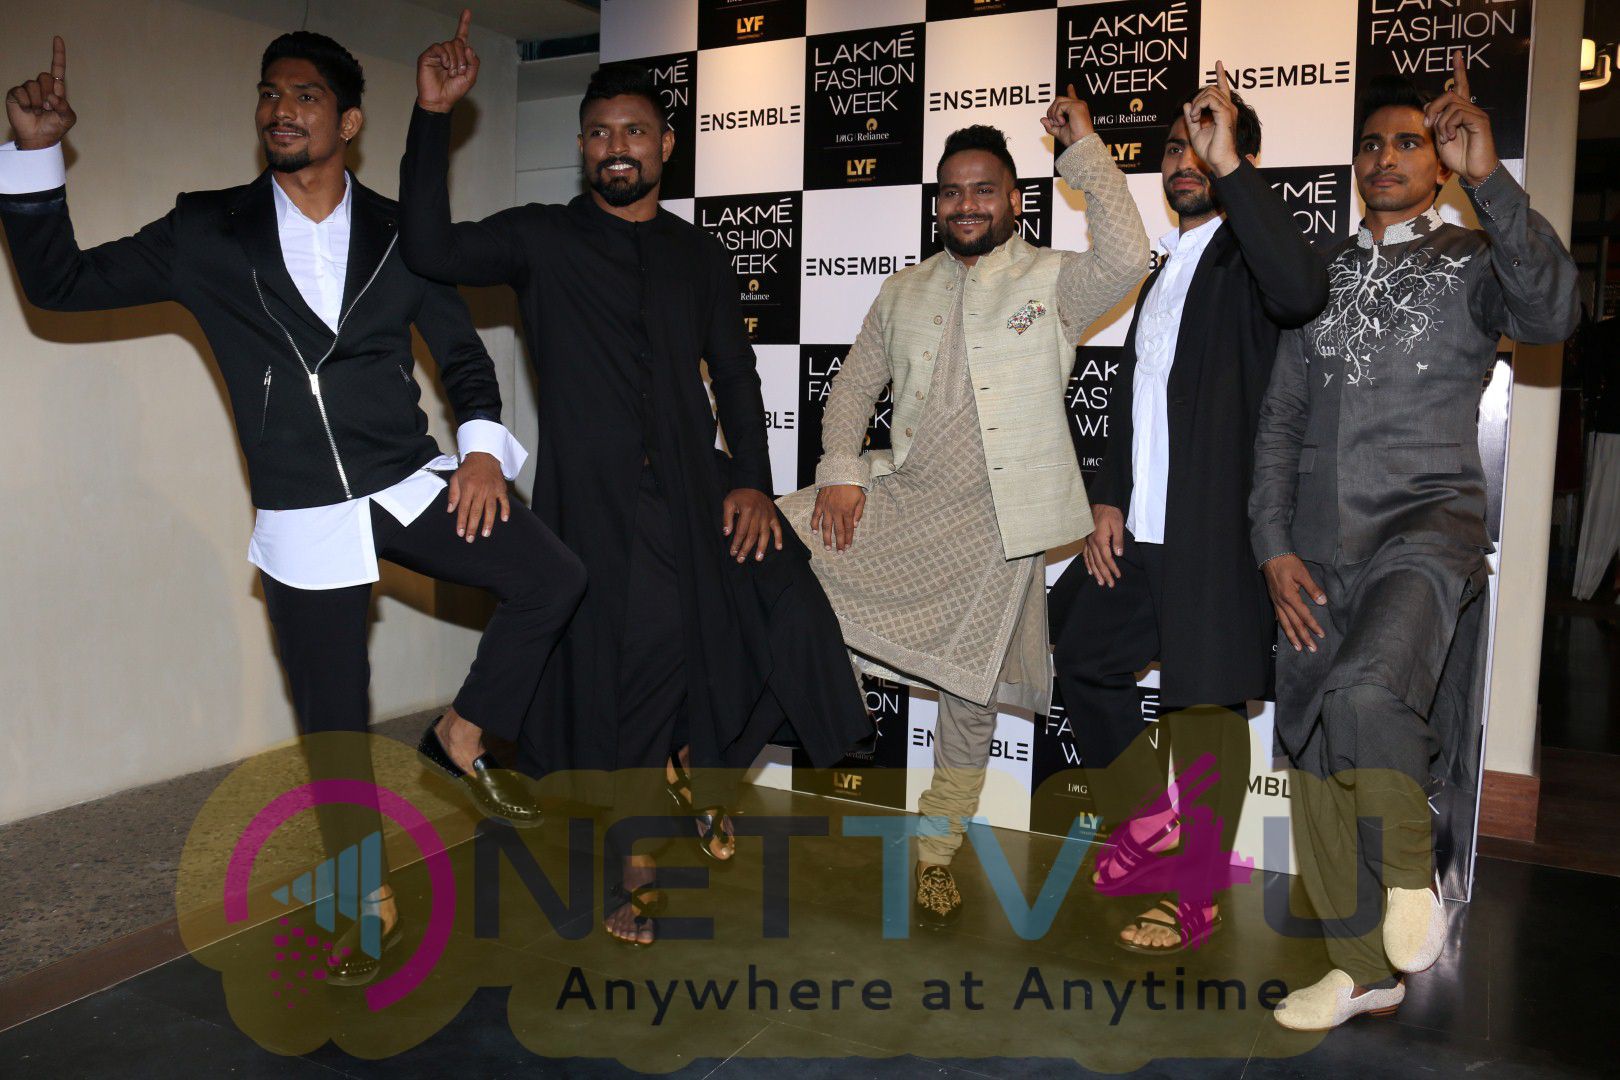 Lakme Fashion Week And Ensemble Invites You For A Exclusive Menswear Showcase By Selected Designers Photos Hindi Gallery